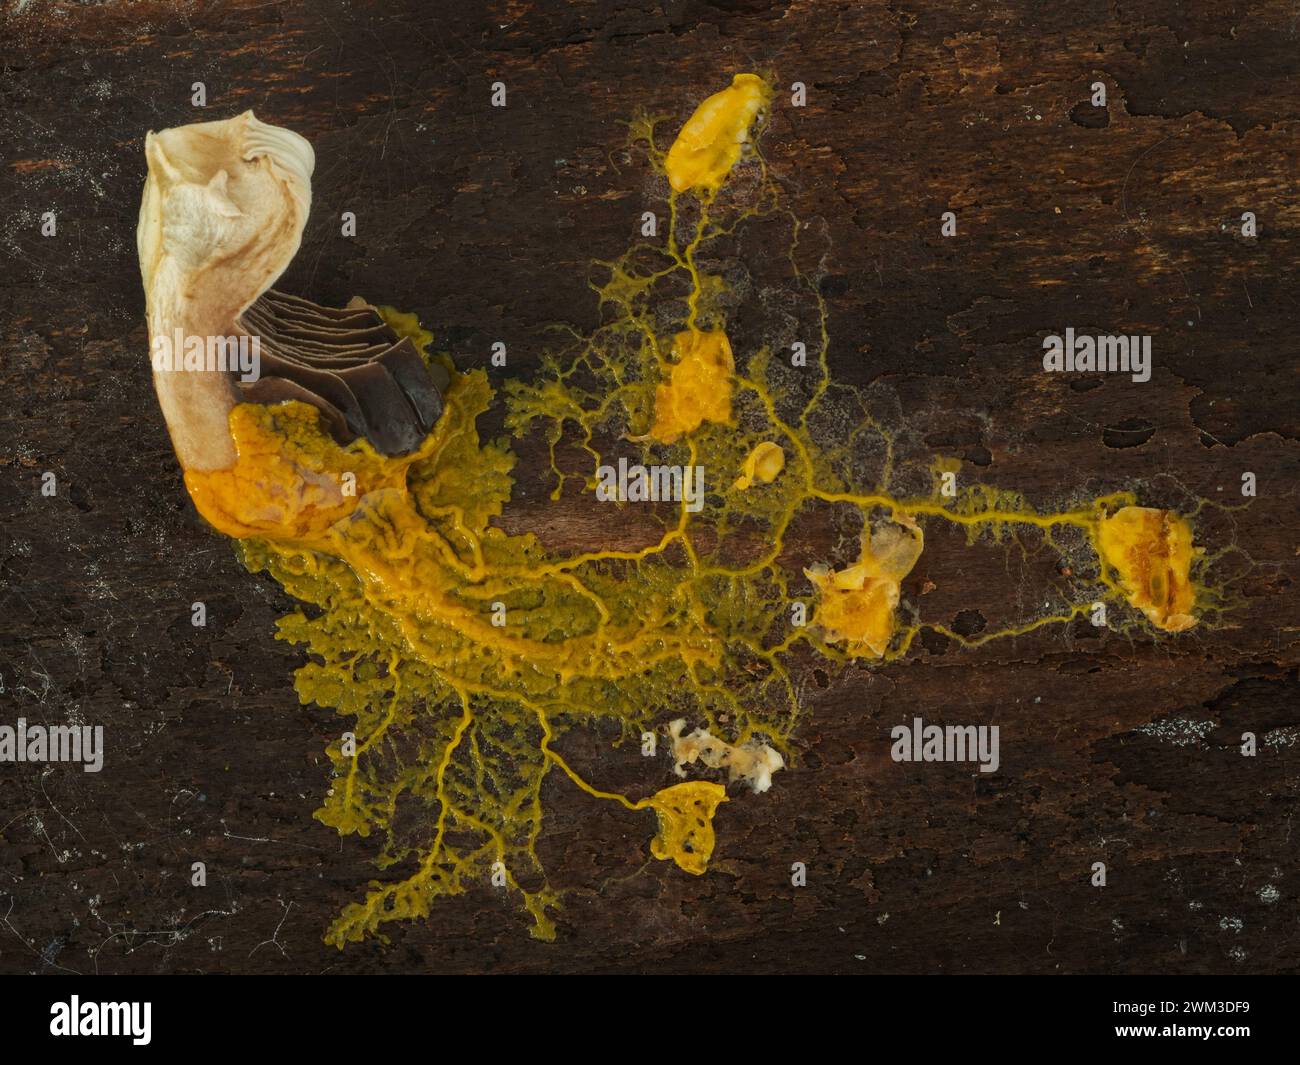 slime mold plasmodium (Badhamia utricularis) networked to feed on rolled oats and a piece of mushroom Stock Photo